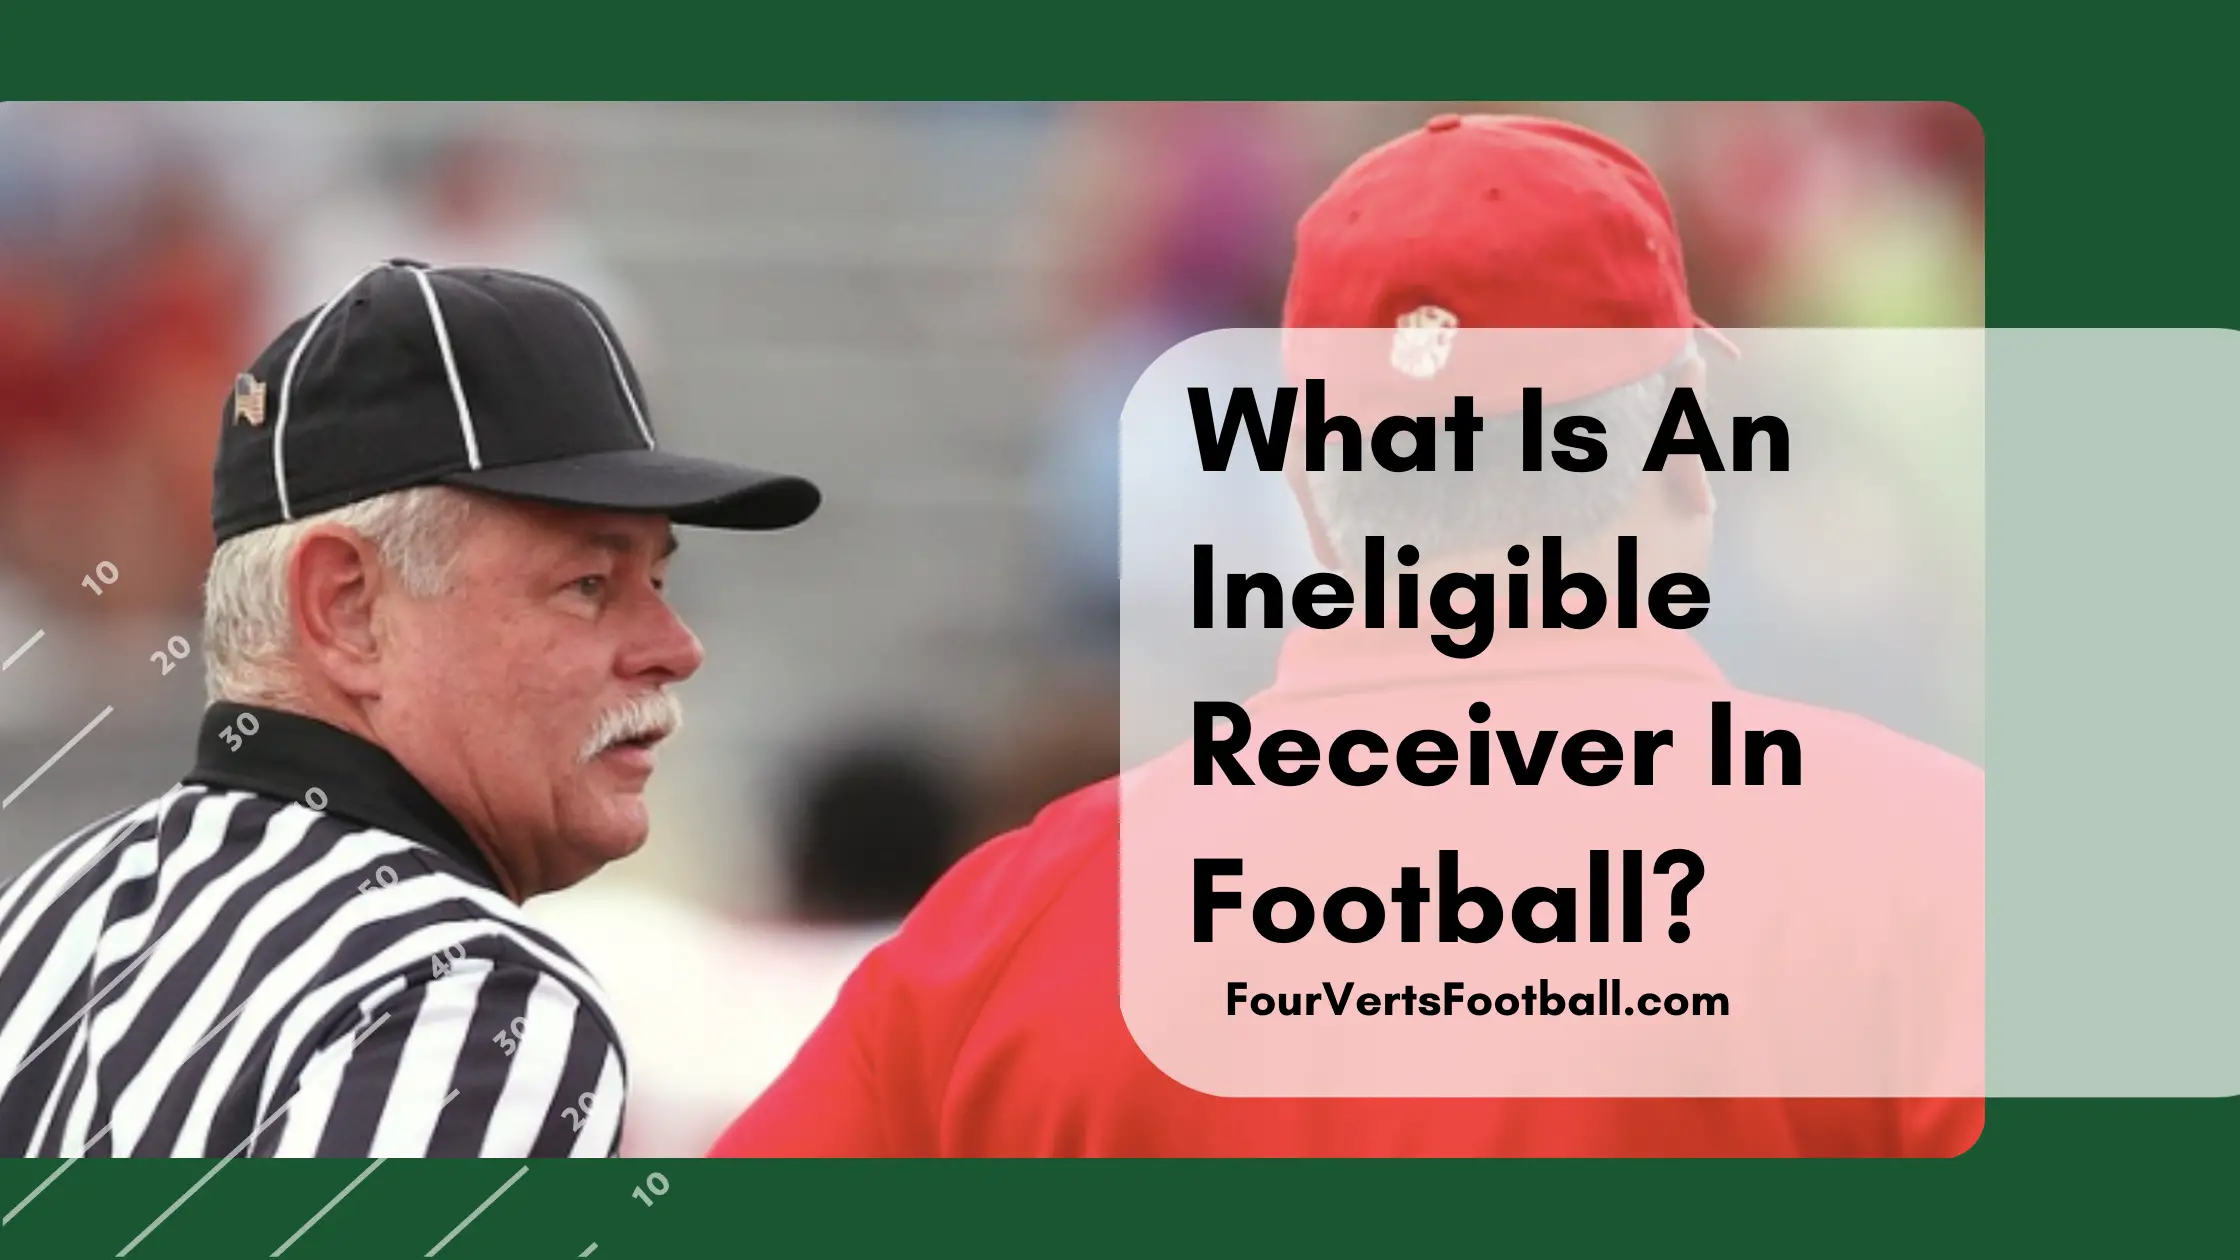 What Is An Ineligible Receiver In Football